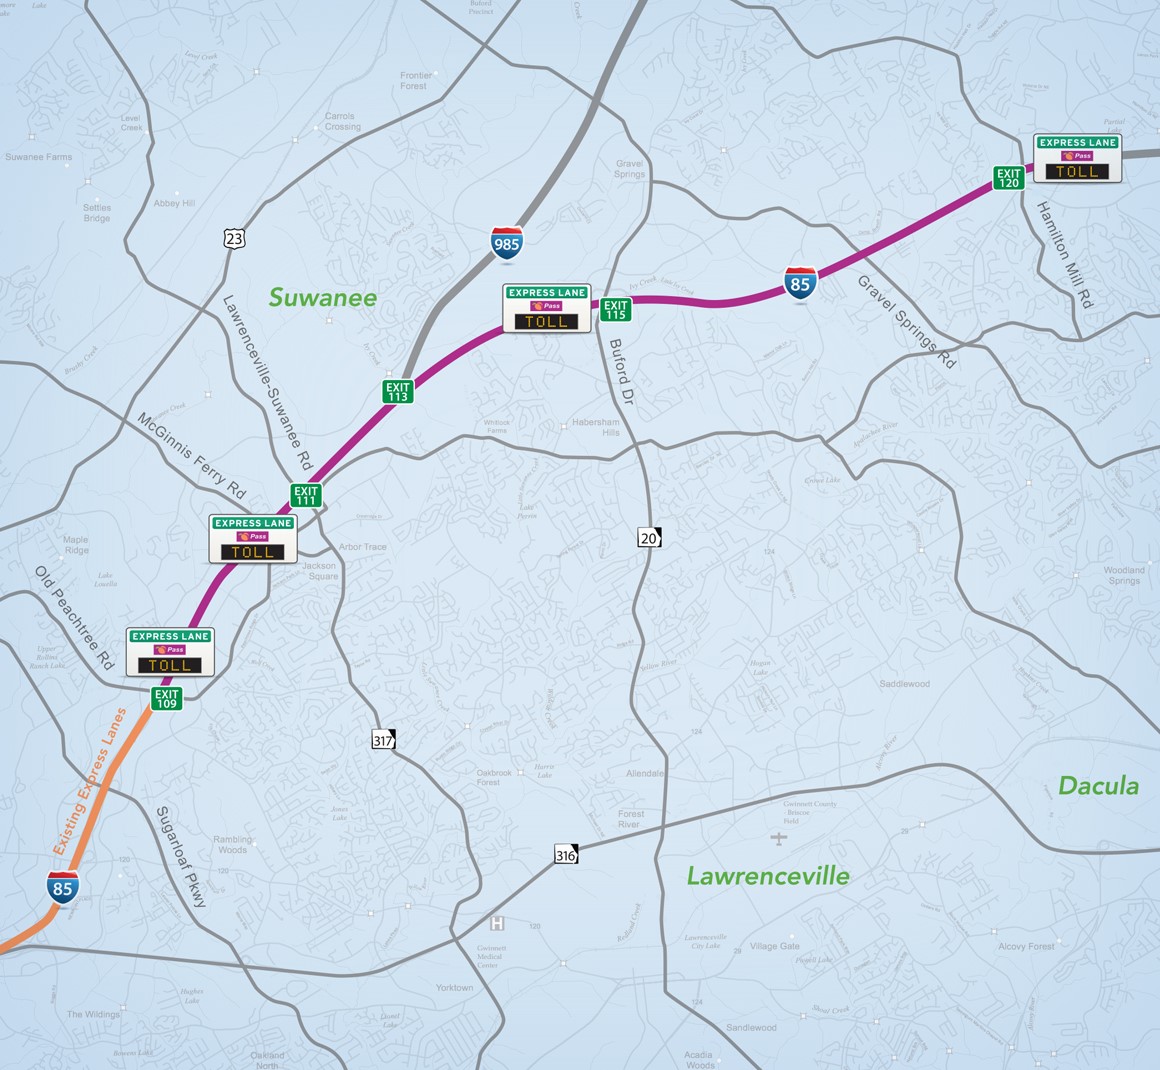 I-85 Extension Map with Toll rates